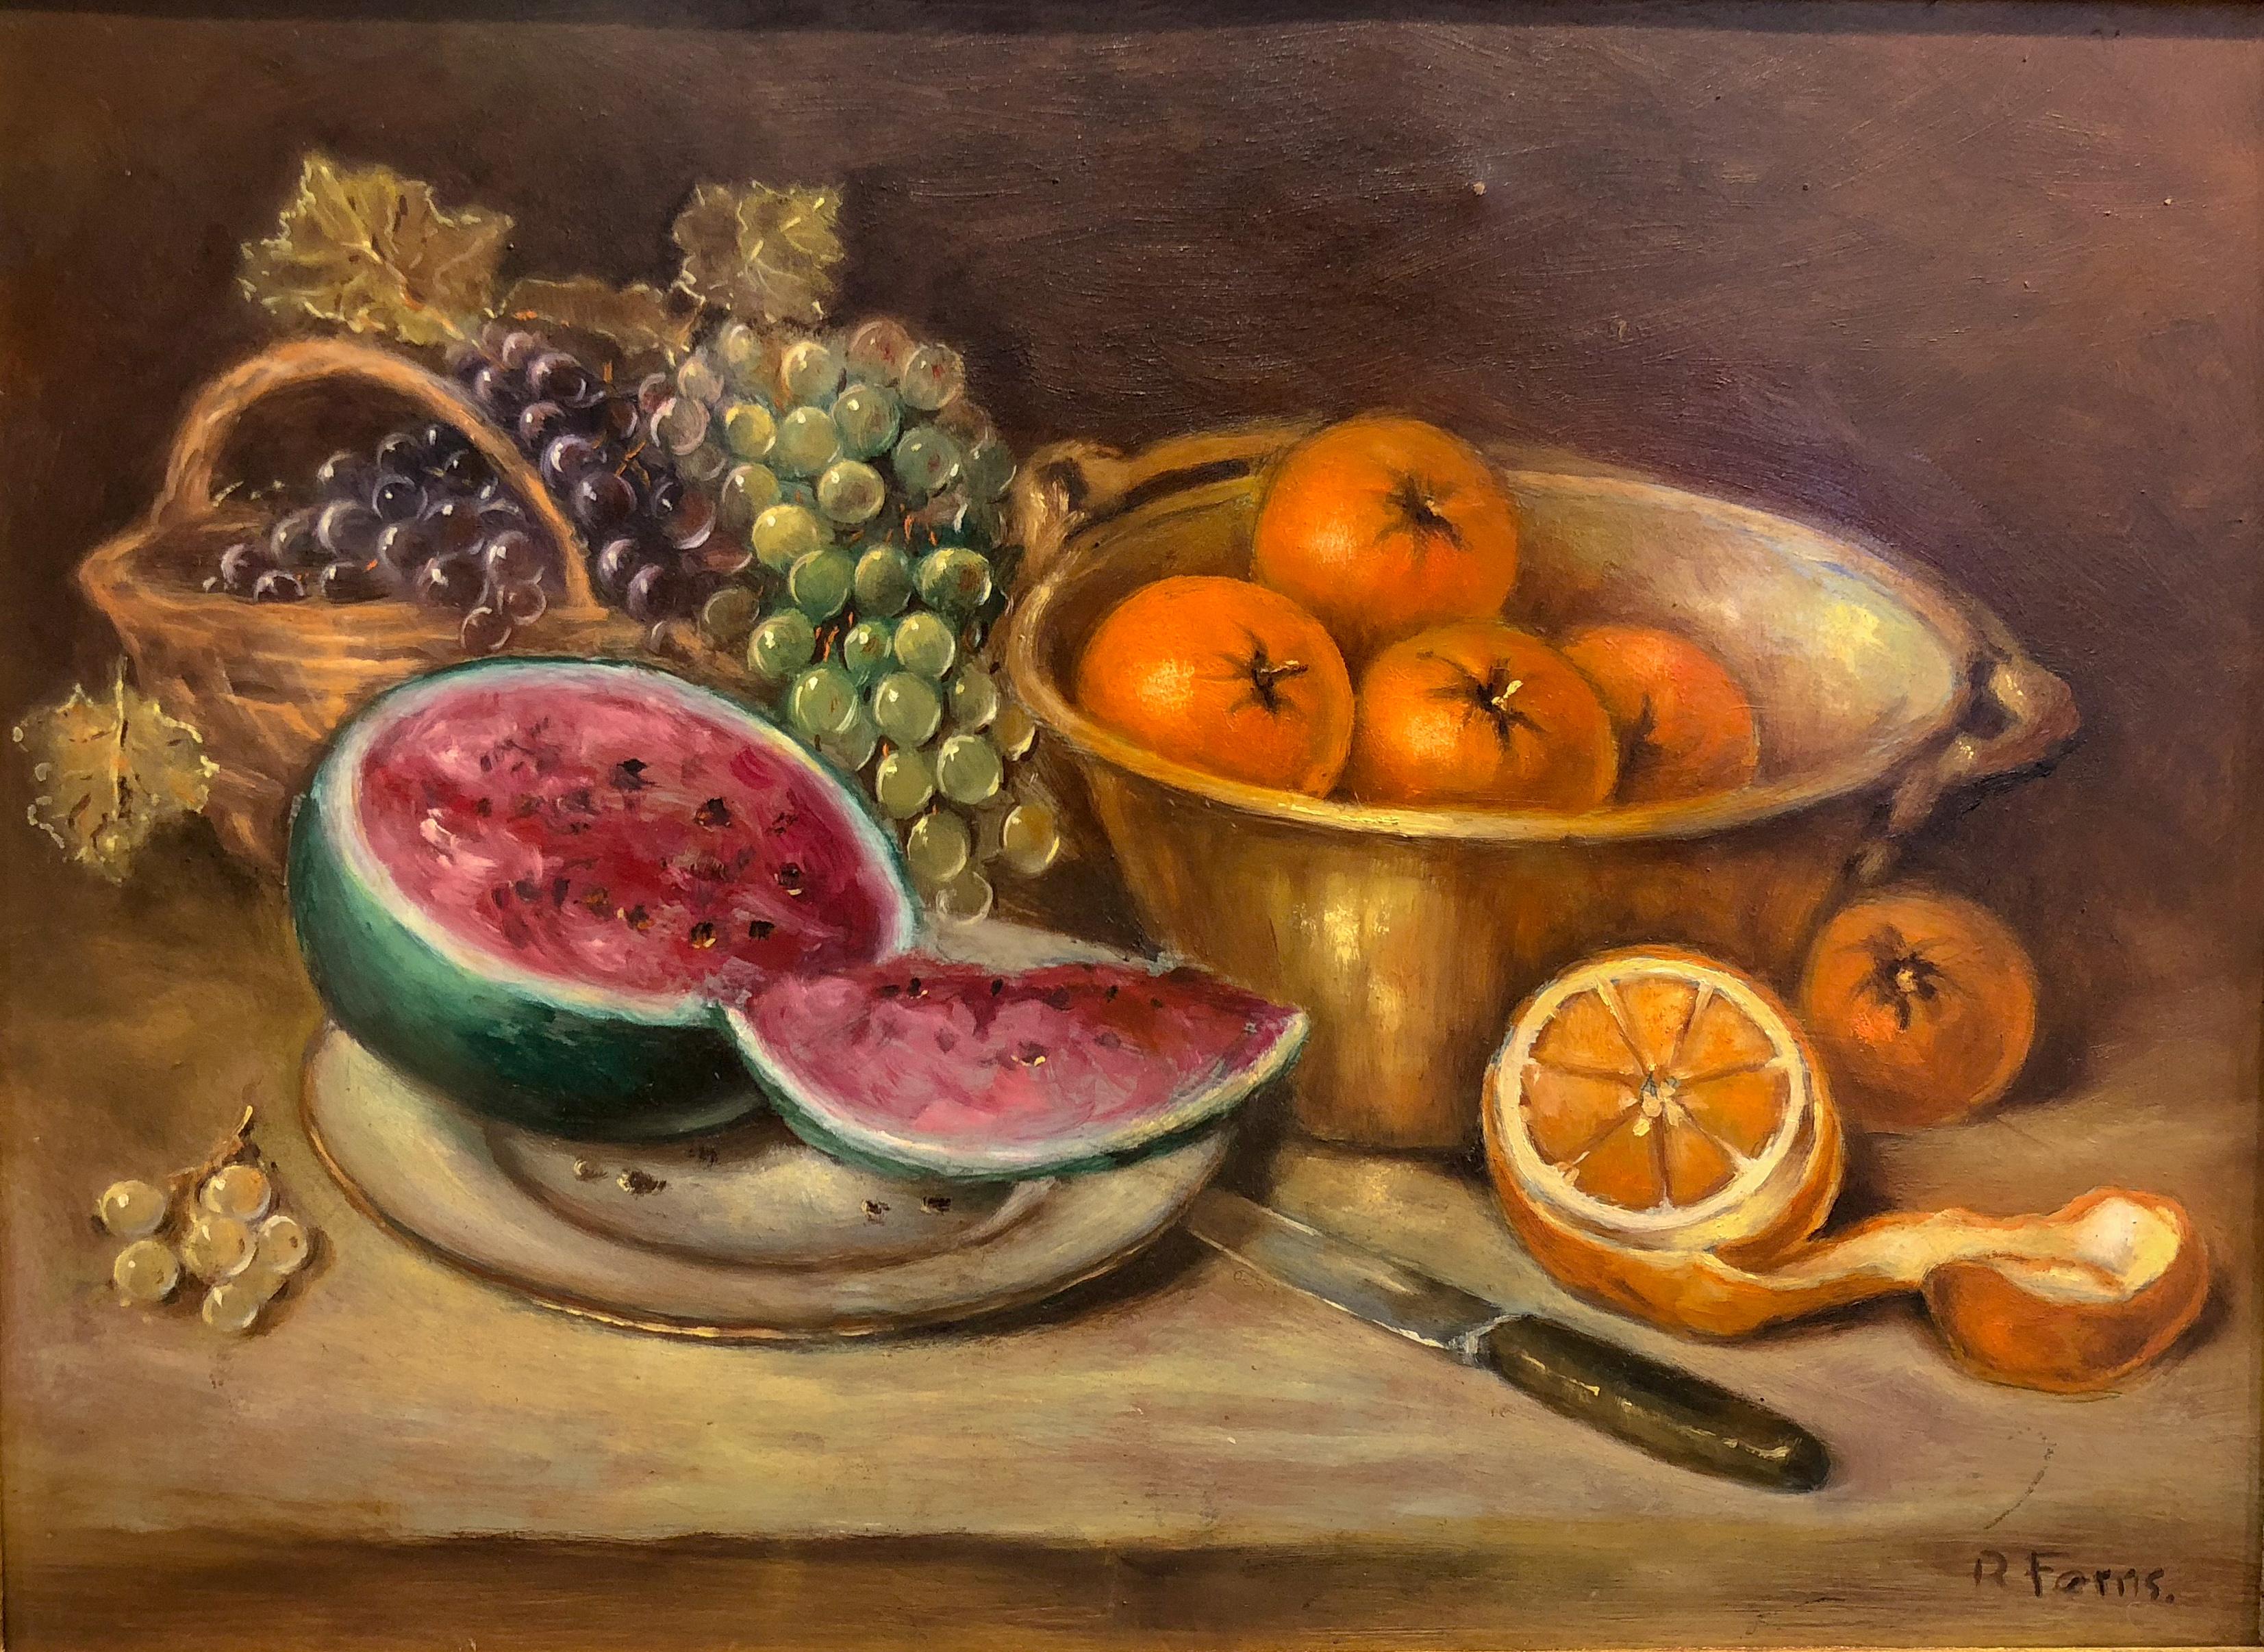 Still life English painting presenting graves, oranges and a watermelon.

Signed lower left corner, “R. Farns.”.